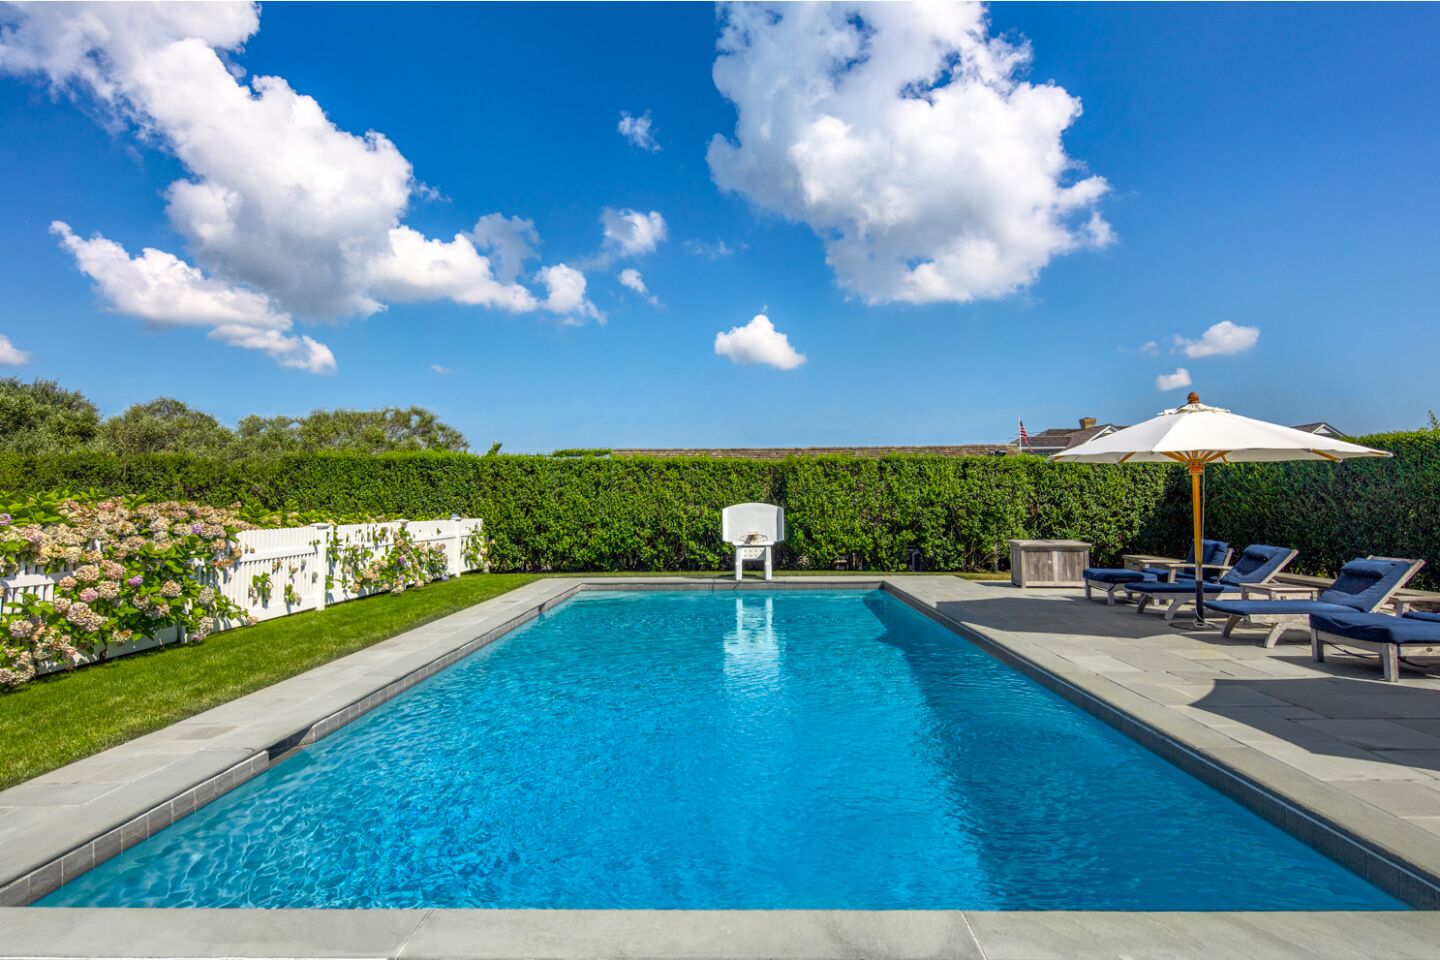 Gwen Verdon's former Quogue home: the pool